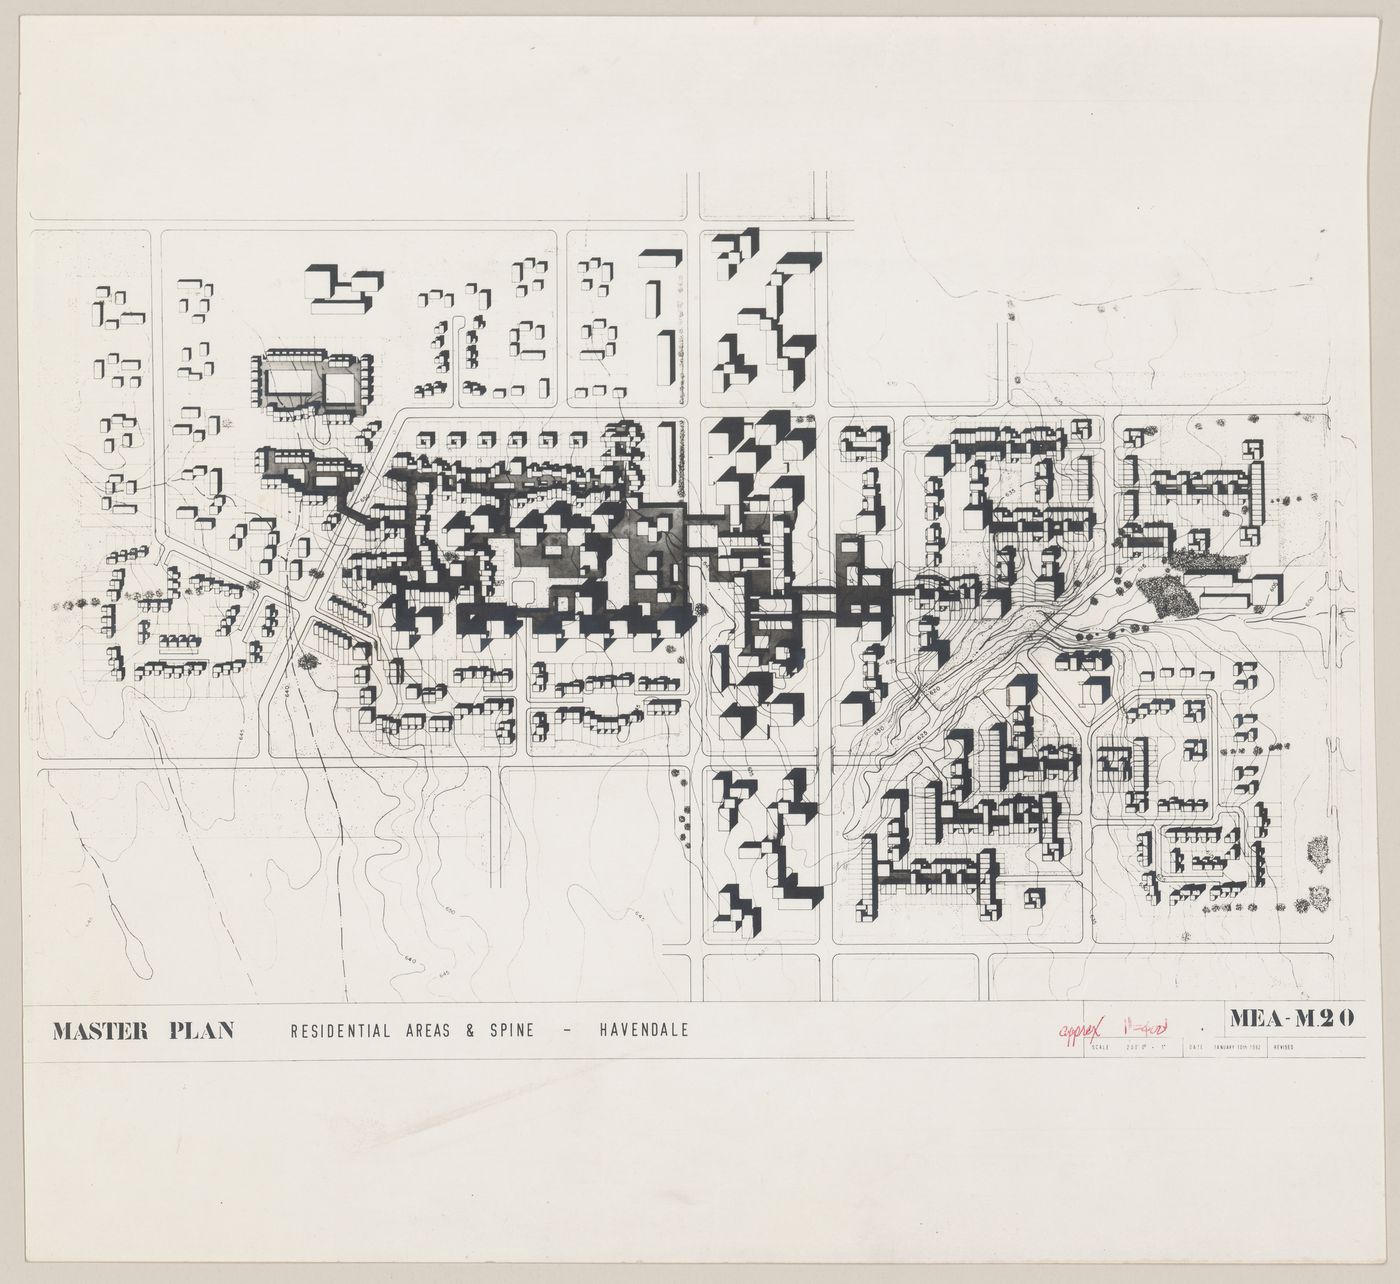 Site plan for Meadowvale, Mississauga, Ontario, Canada